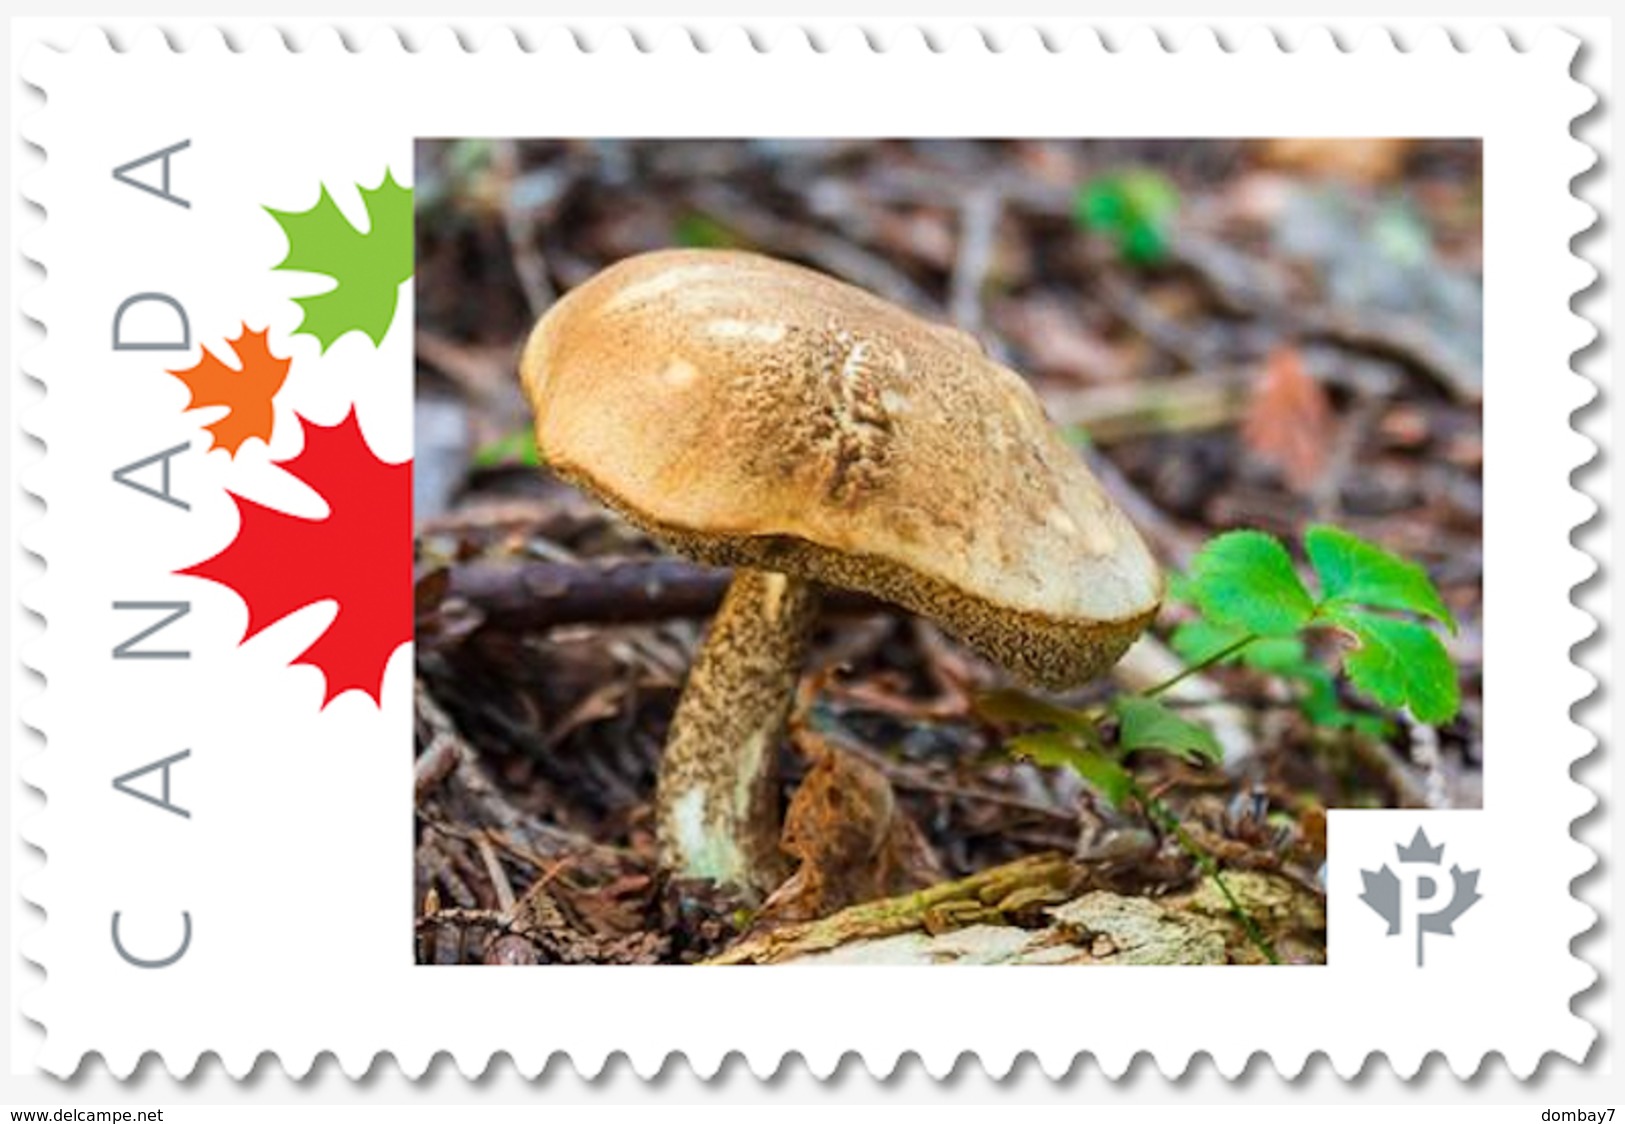 NEW!  MUSHROOM  - Unique Picture Postage Stamp MNH Canada 2018 P18-01sn09 - Pilze